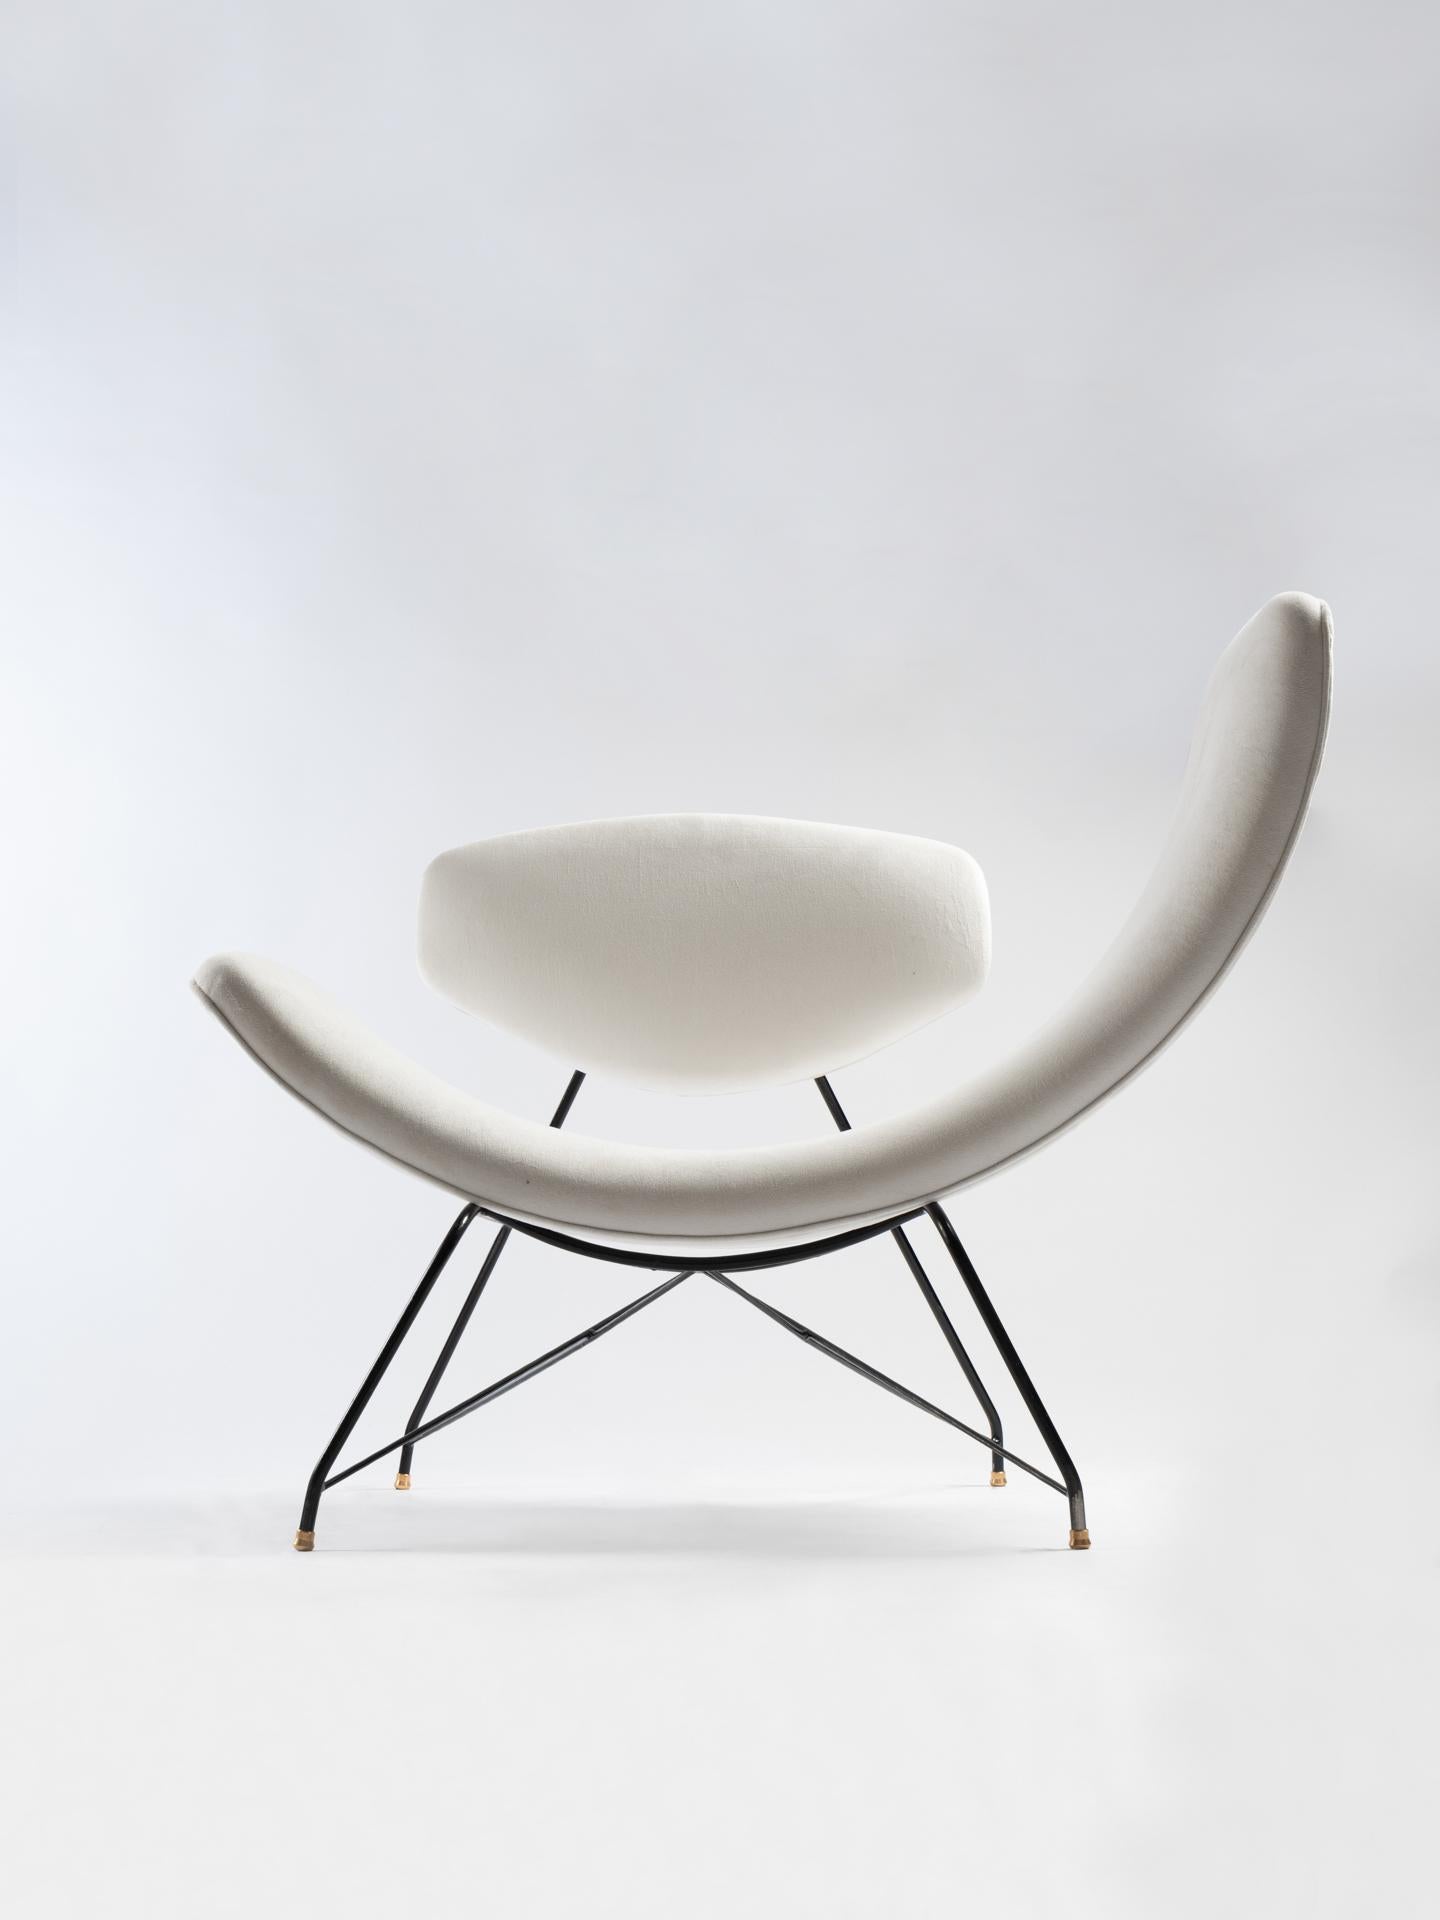 Carlo Hauner and Martin Eisler both immigrated from Europe to Brazil due to the war. They met in 1953 and shortly after opened Moveis Artesanal, which later on changed its name to Forma.    
The Reversivel Chair was designed in 1955 and is